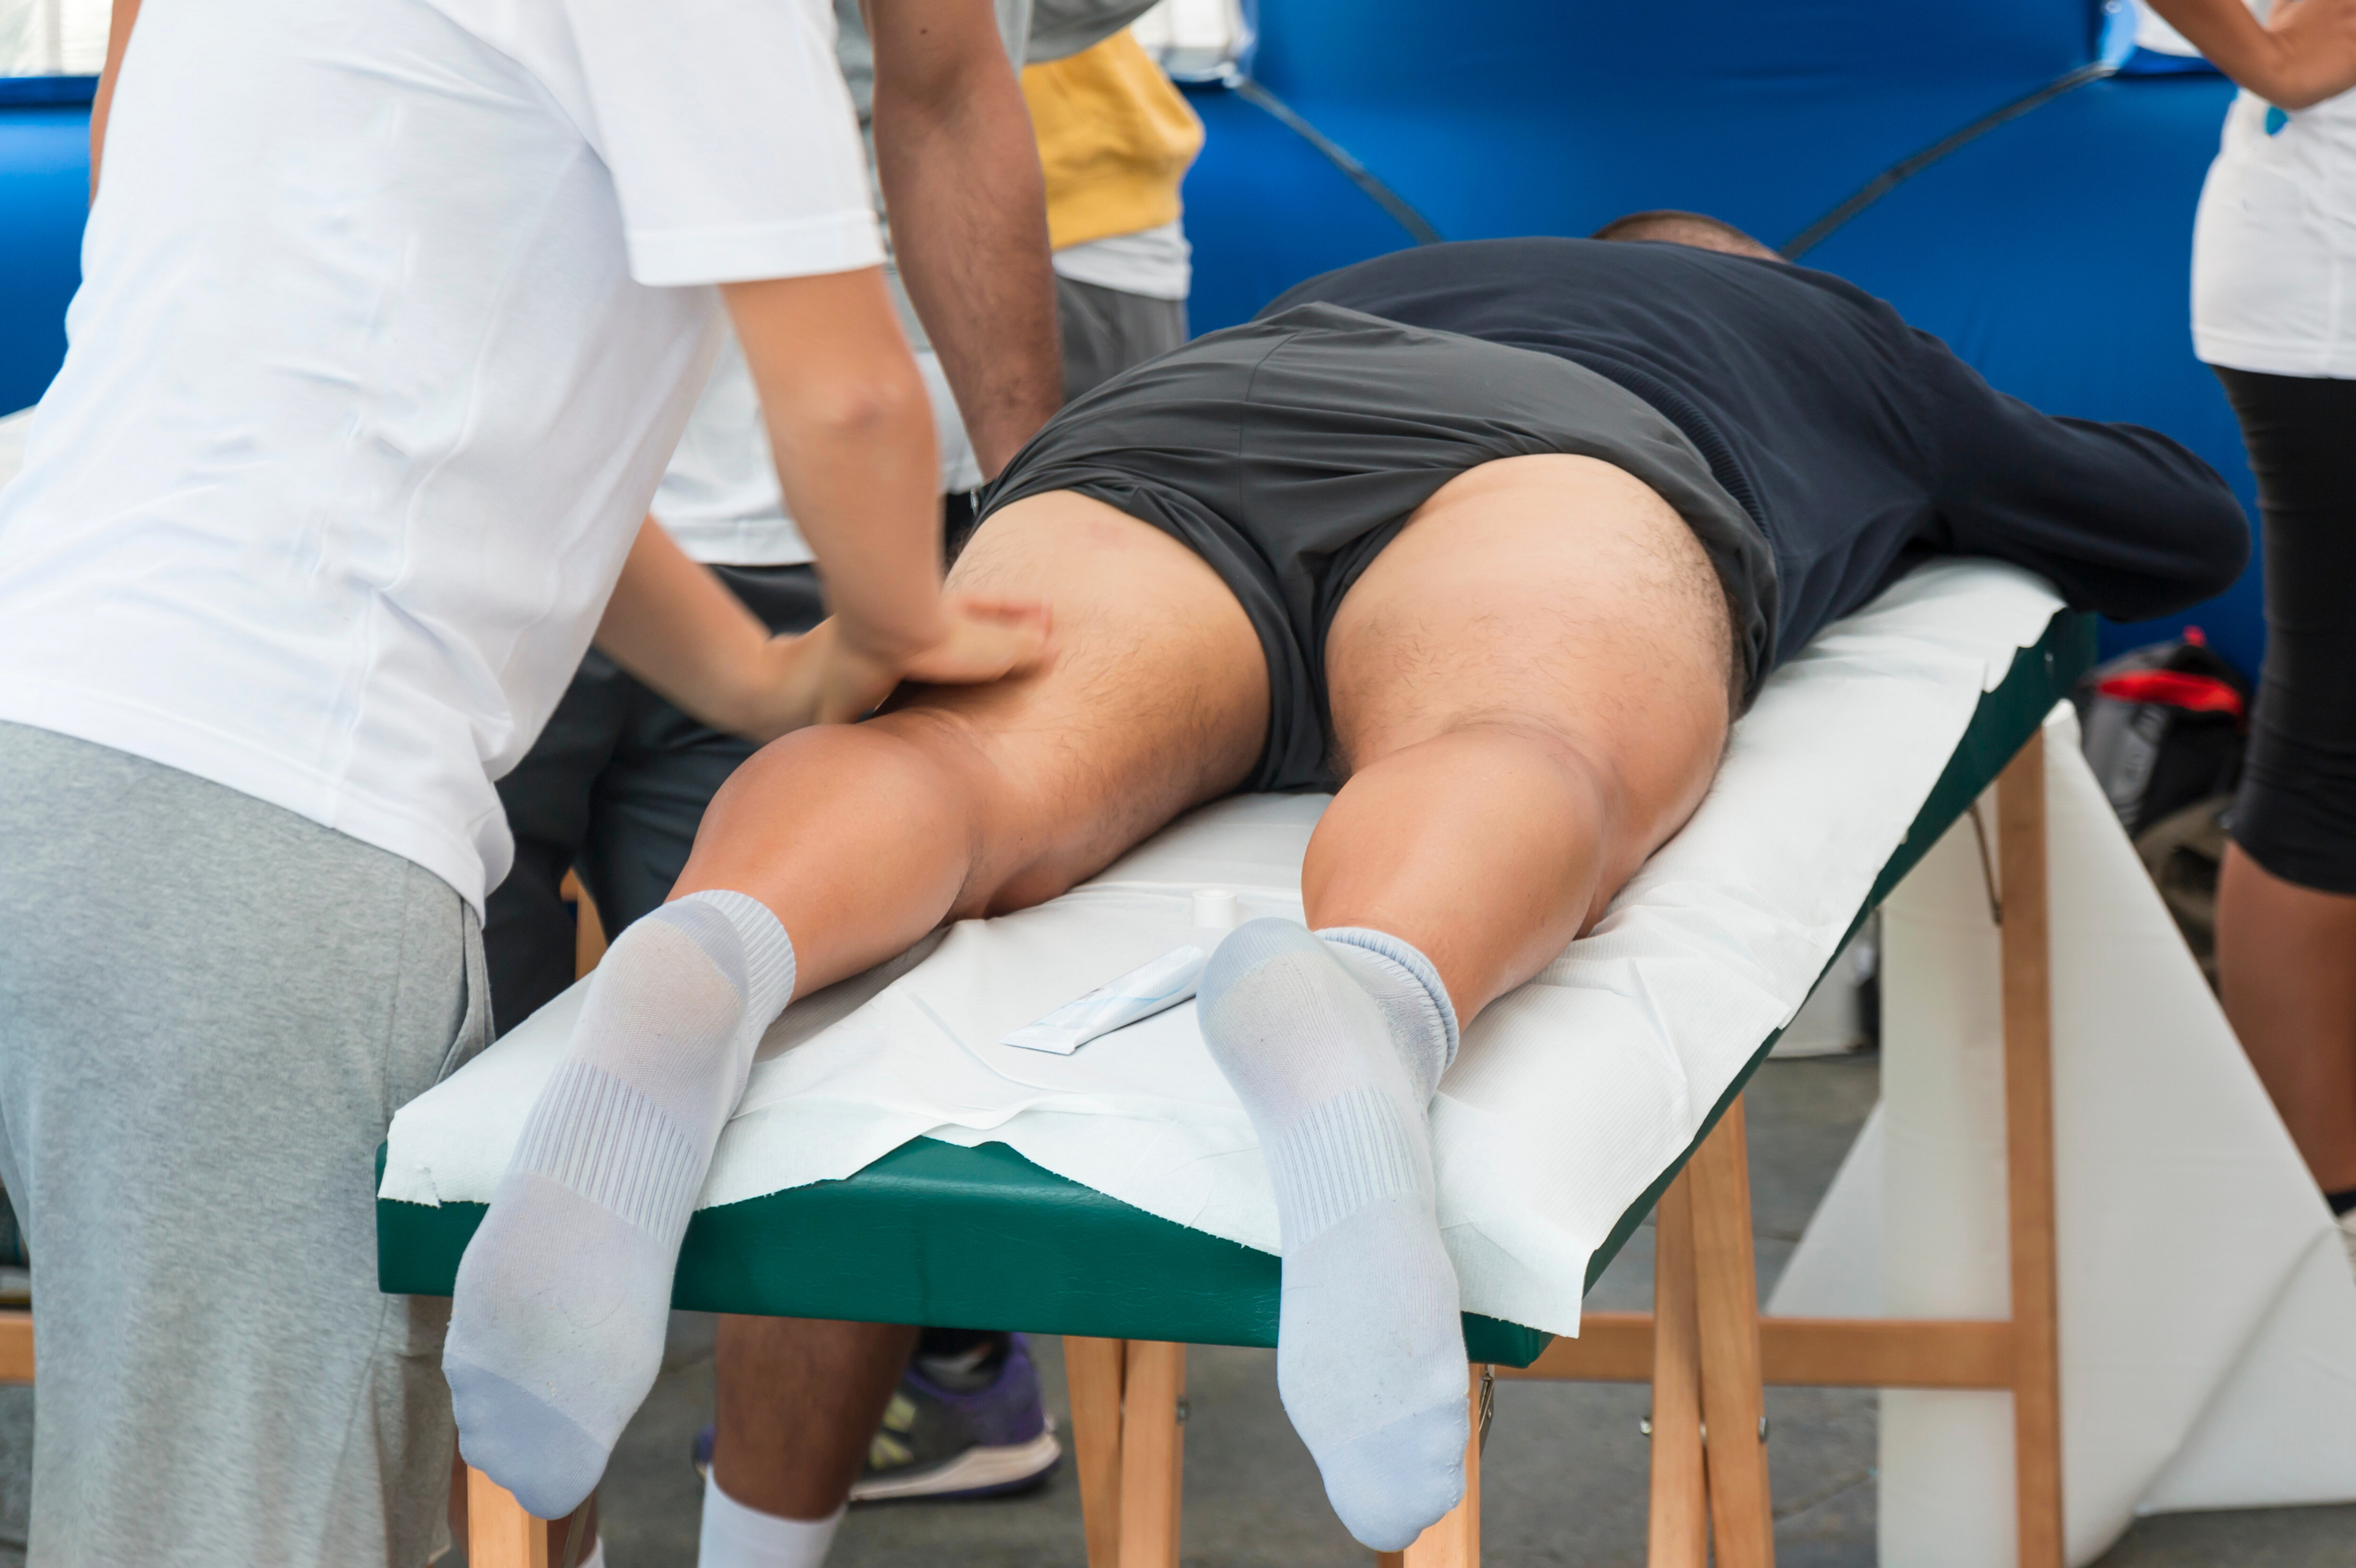 Avoid massage during the early stage of hamstring healing.